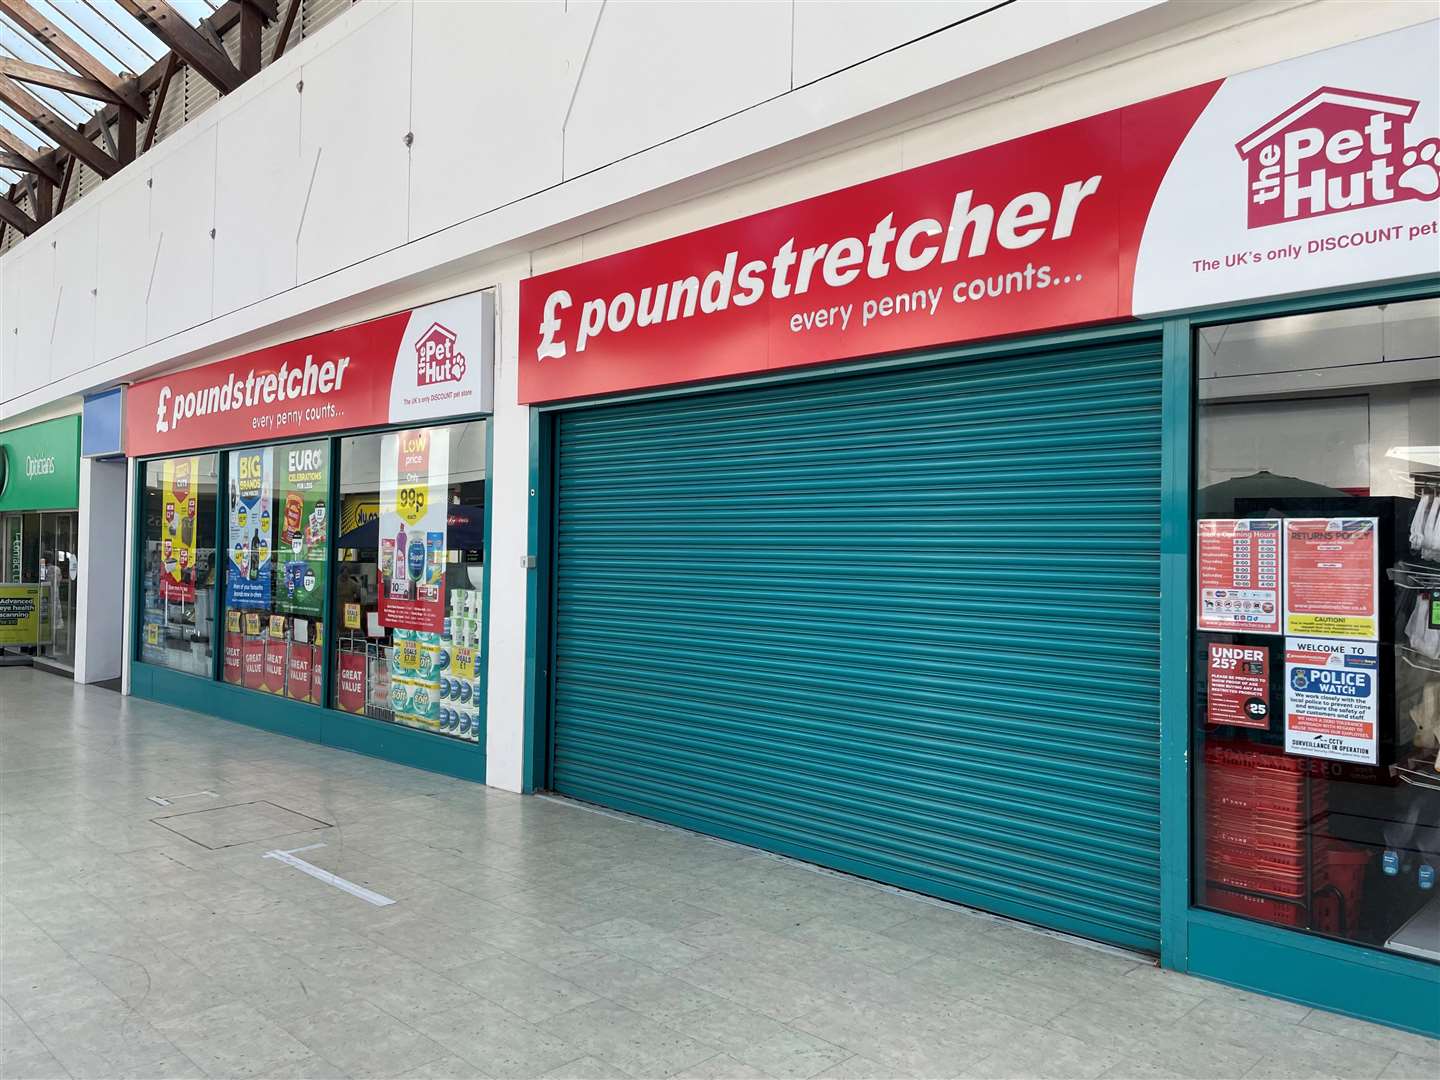 Poundstretcher has said it is part of an open and ongoing investigation